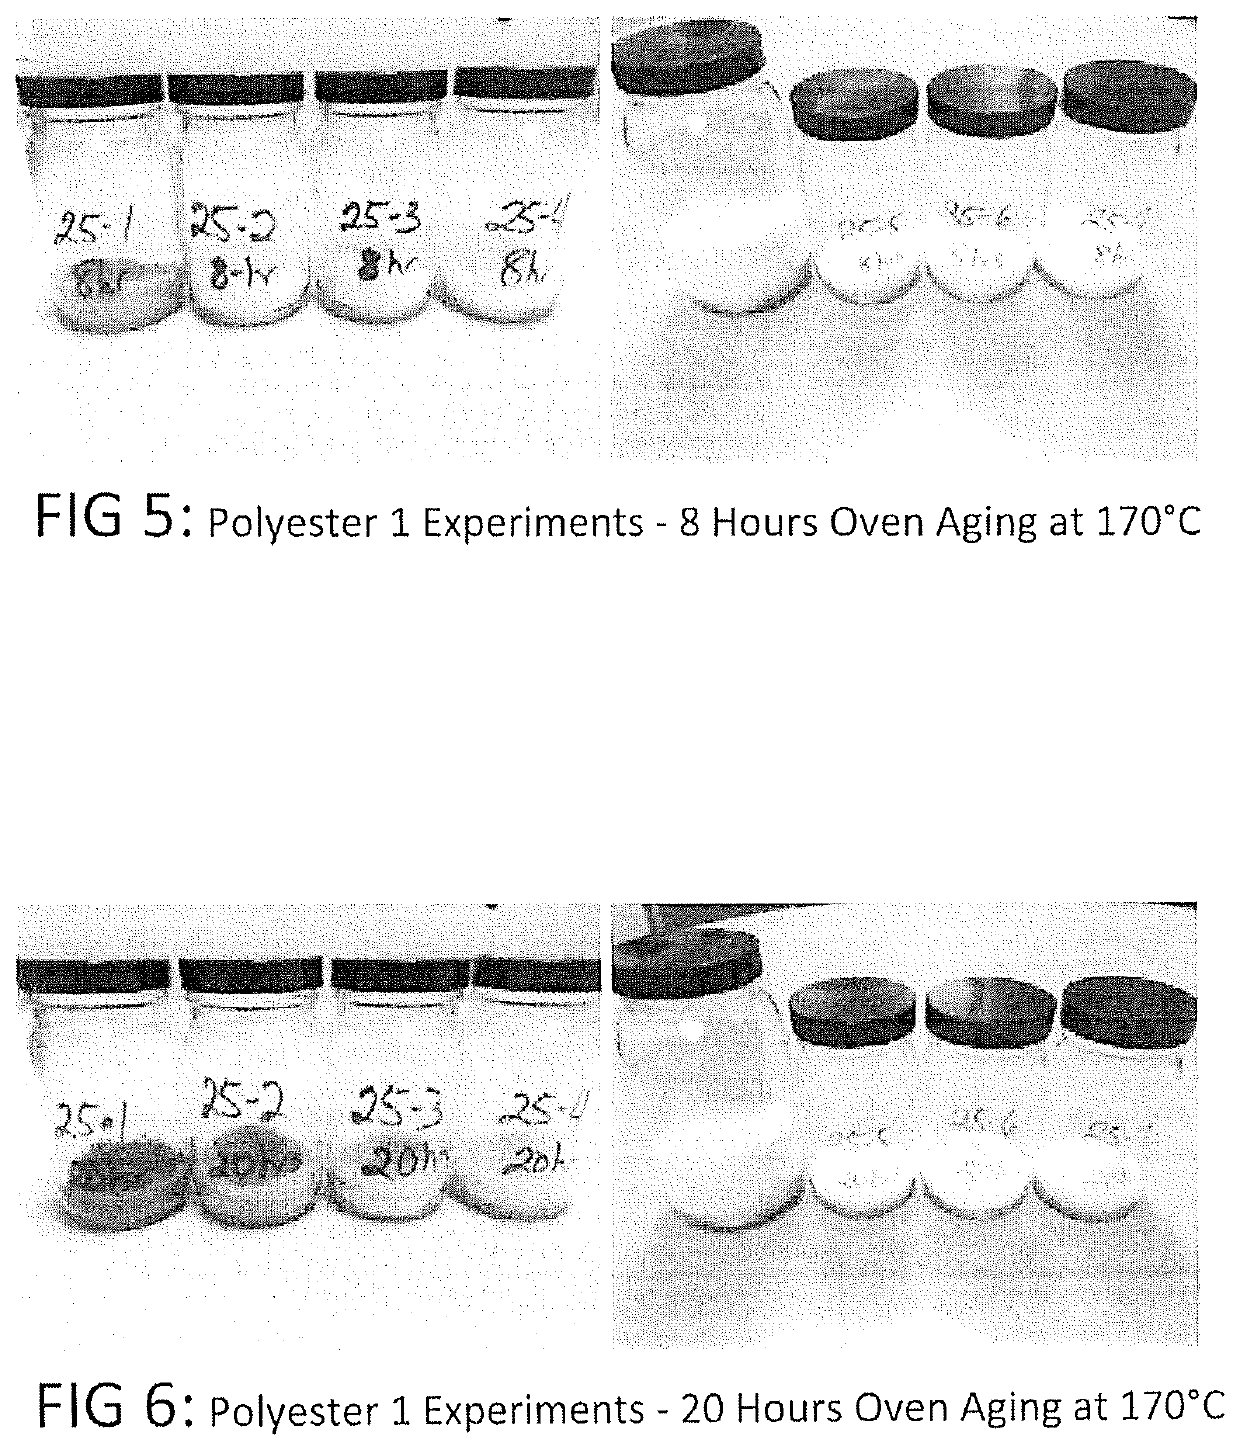 Polymer compositions having improved properties of thermal stability, color, and/or flow